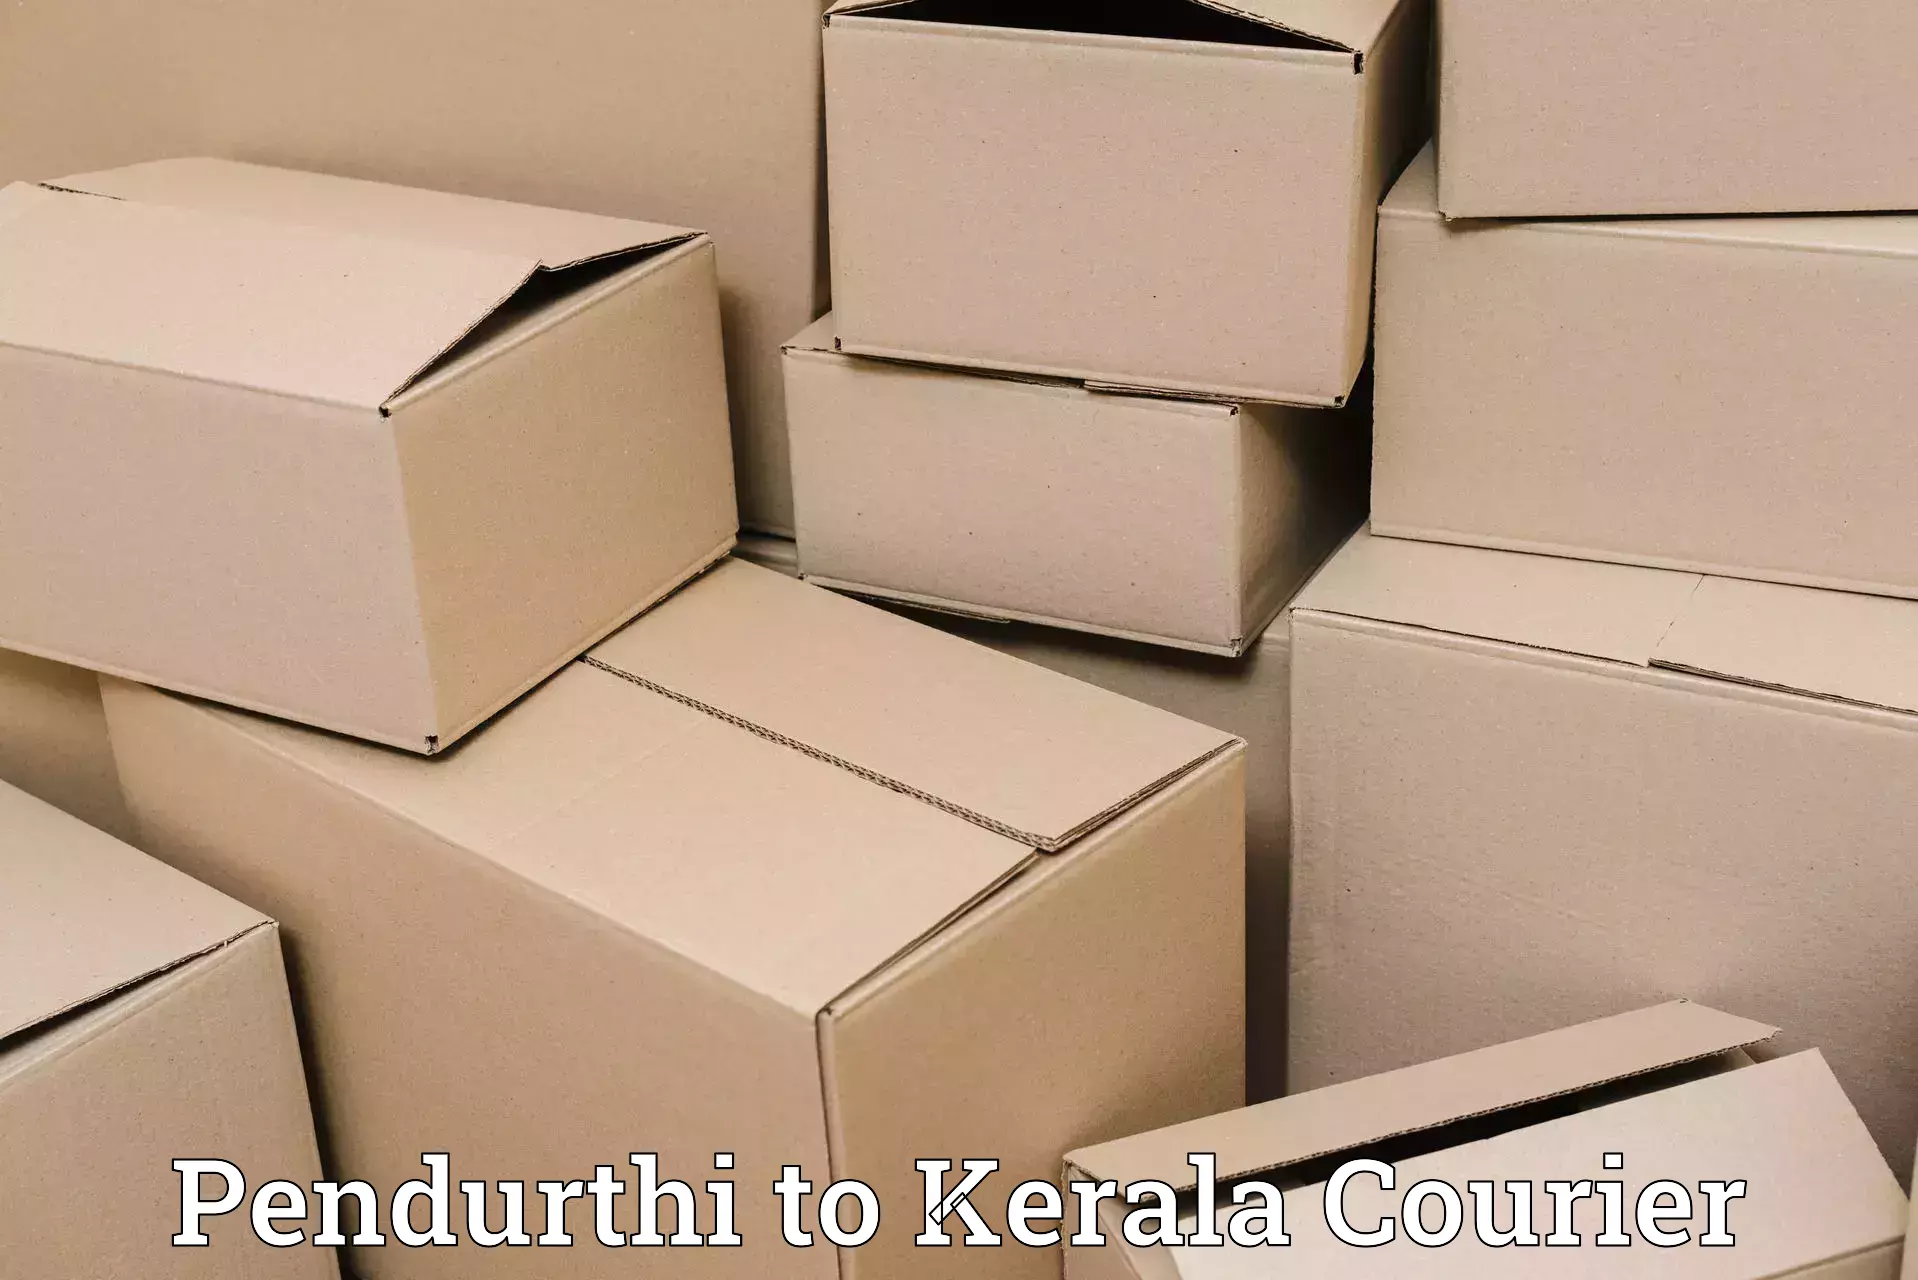 Courier service innovation Pendurthi to Rajamudy